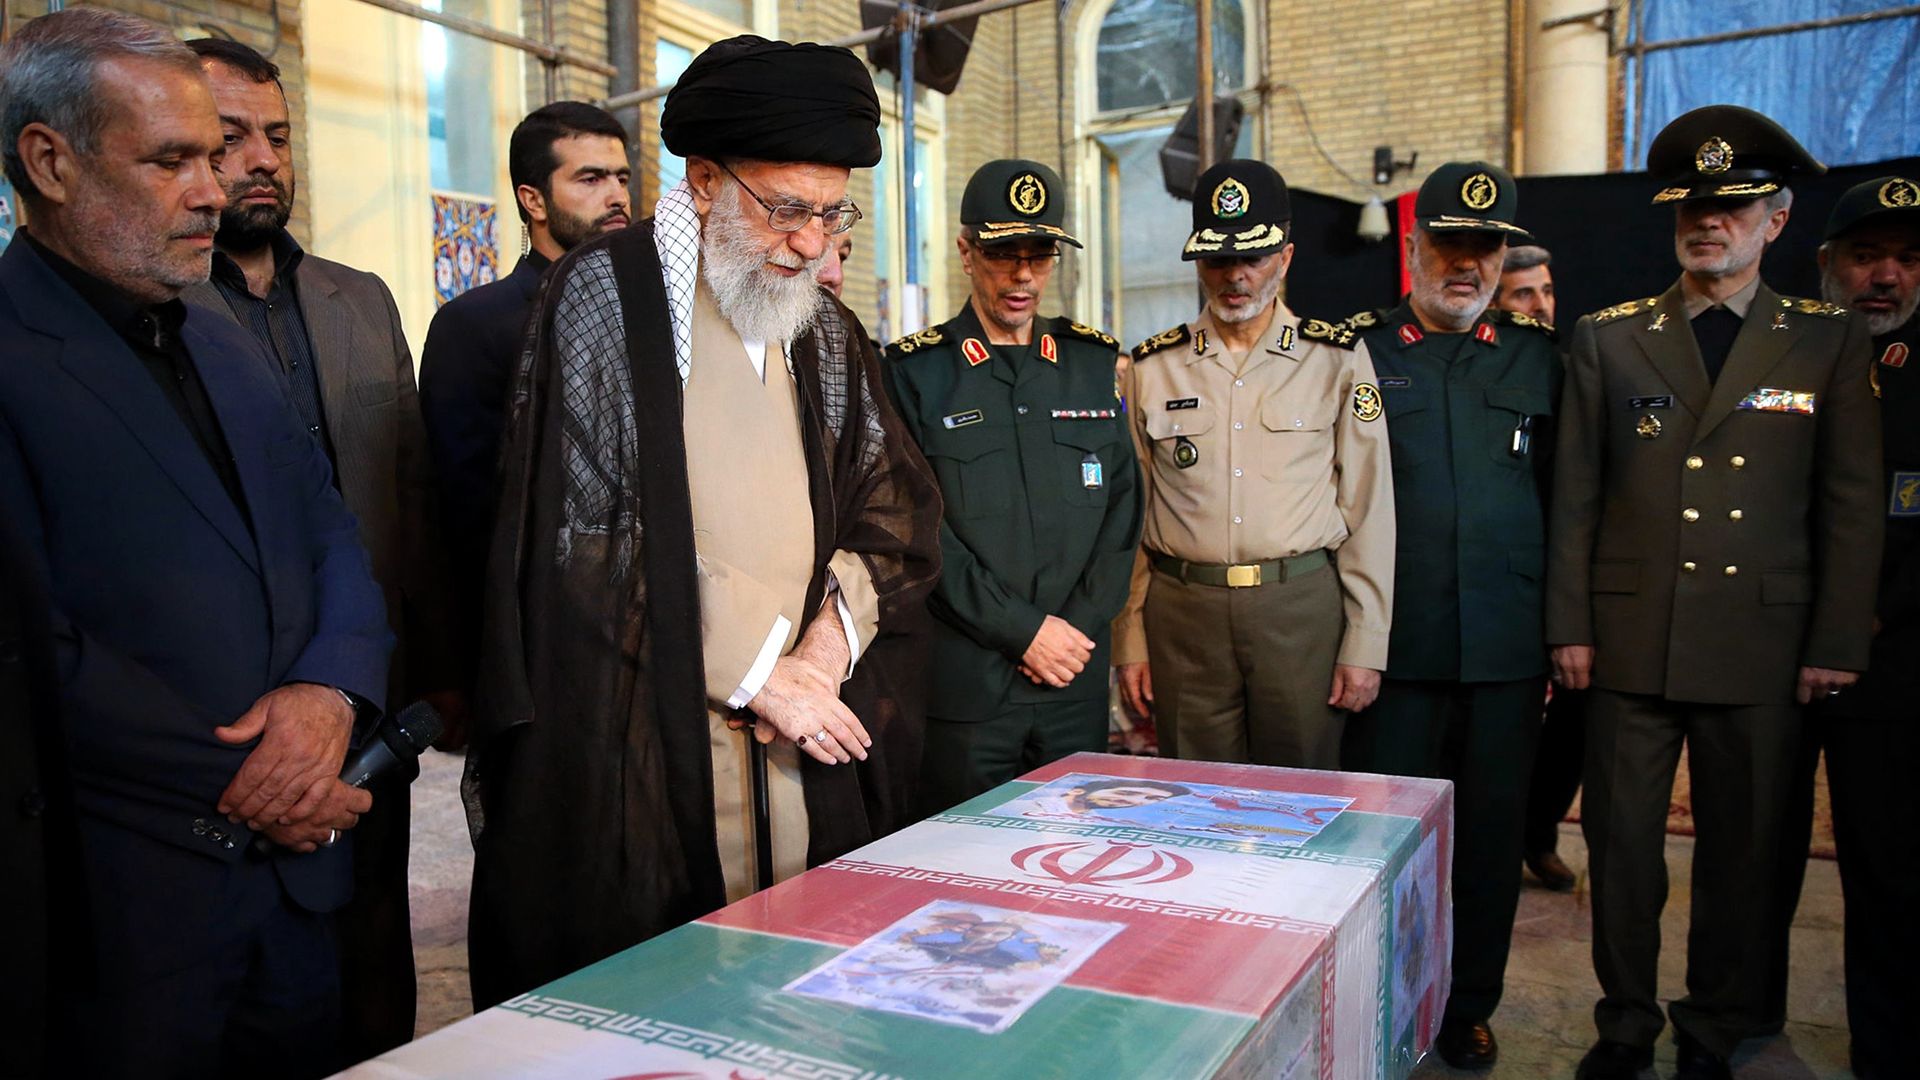 Supreme Leader of Iran, Ali Khamenei attends the funeral ceremony of a member of Islamic Revolutionary Guard Corps who died during a clash in Syria